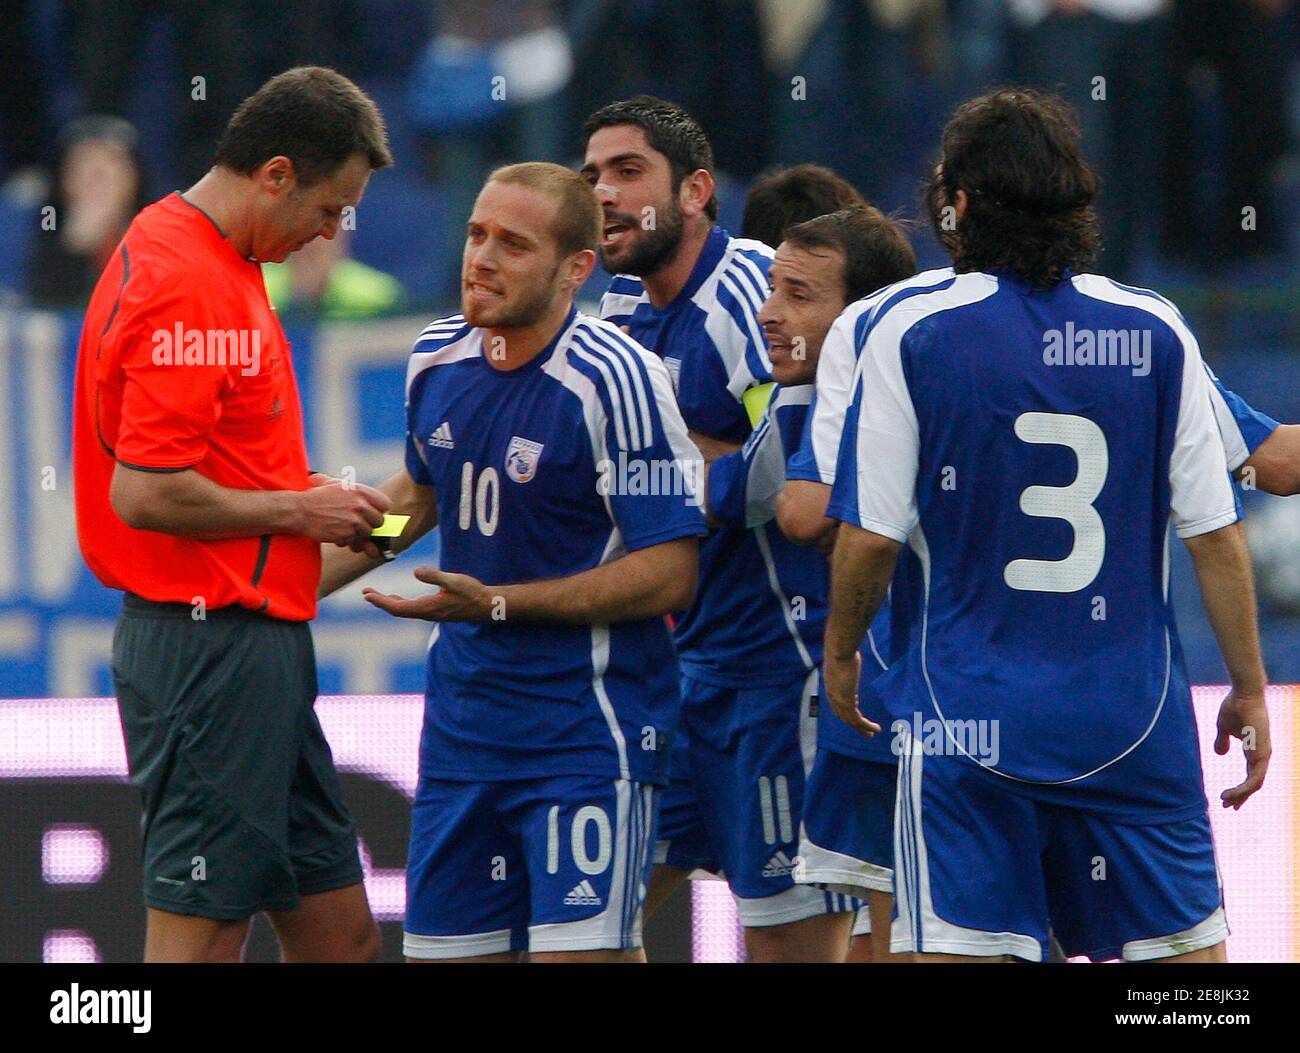 Cyprus' players argue with referee Martin Ingvarsson during their 2010 World Cup qualifying soccer match against Bulgaria at Vassil Levski stadium in Sofia April 1, 2009.   REUTERS/Oleg Popov    (BULGARIA SPORT SOCCER) Stock Photo